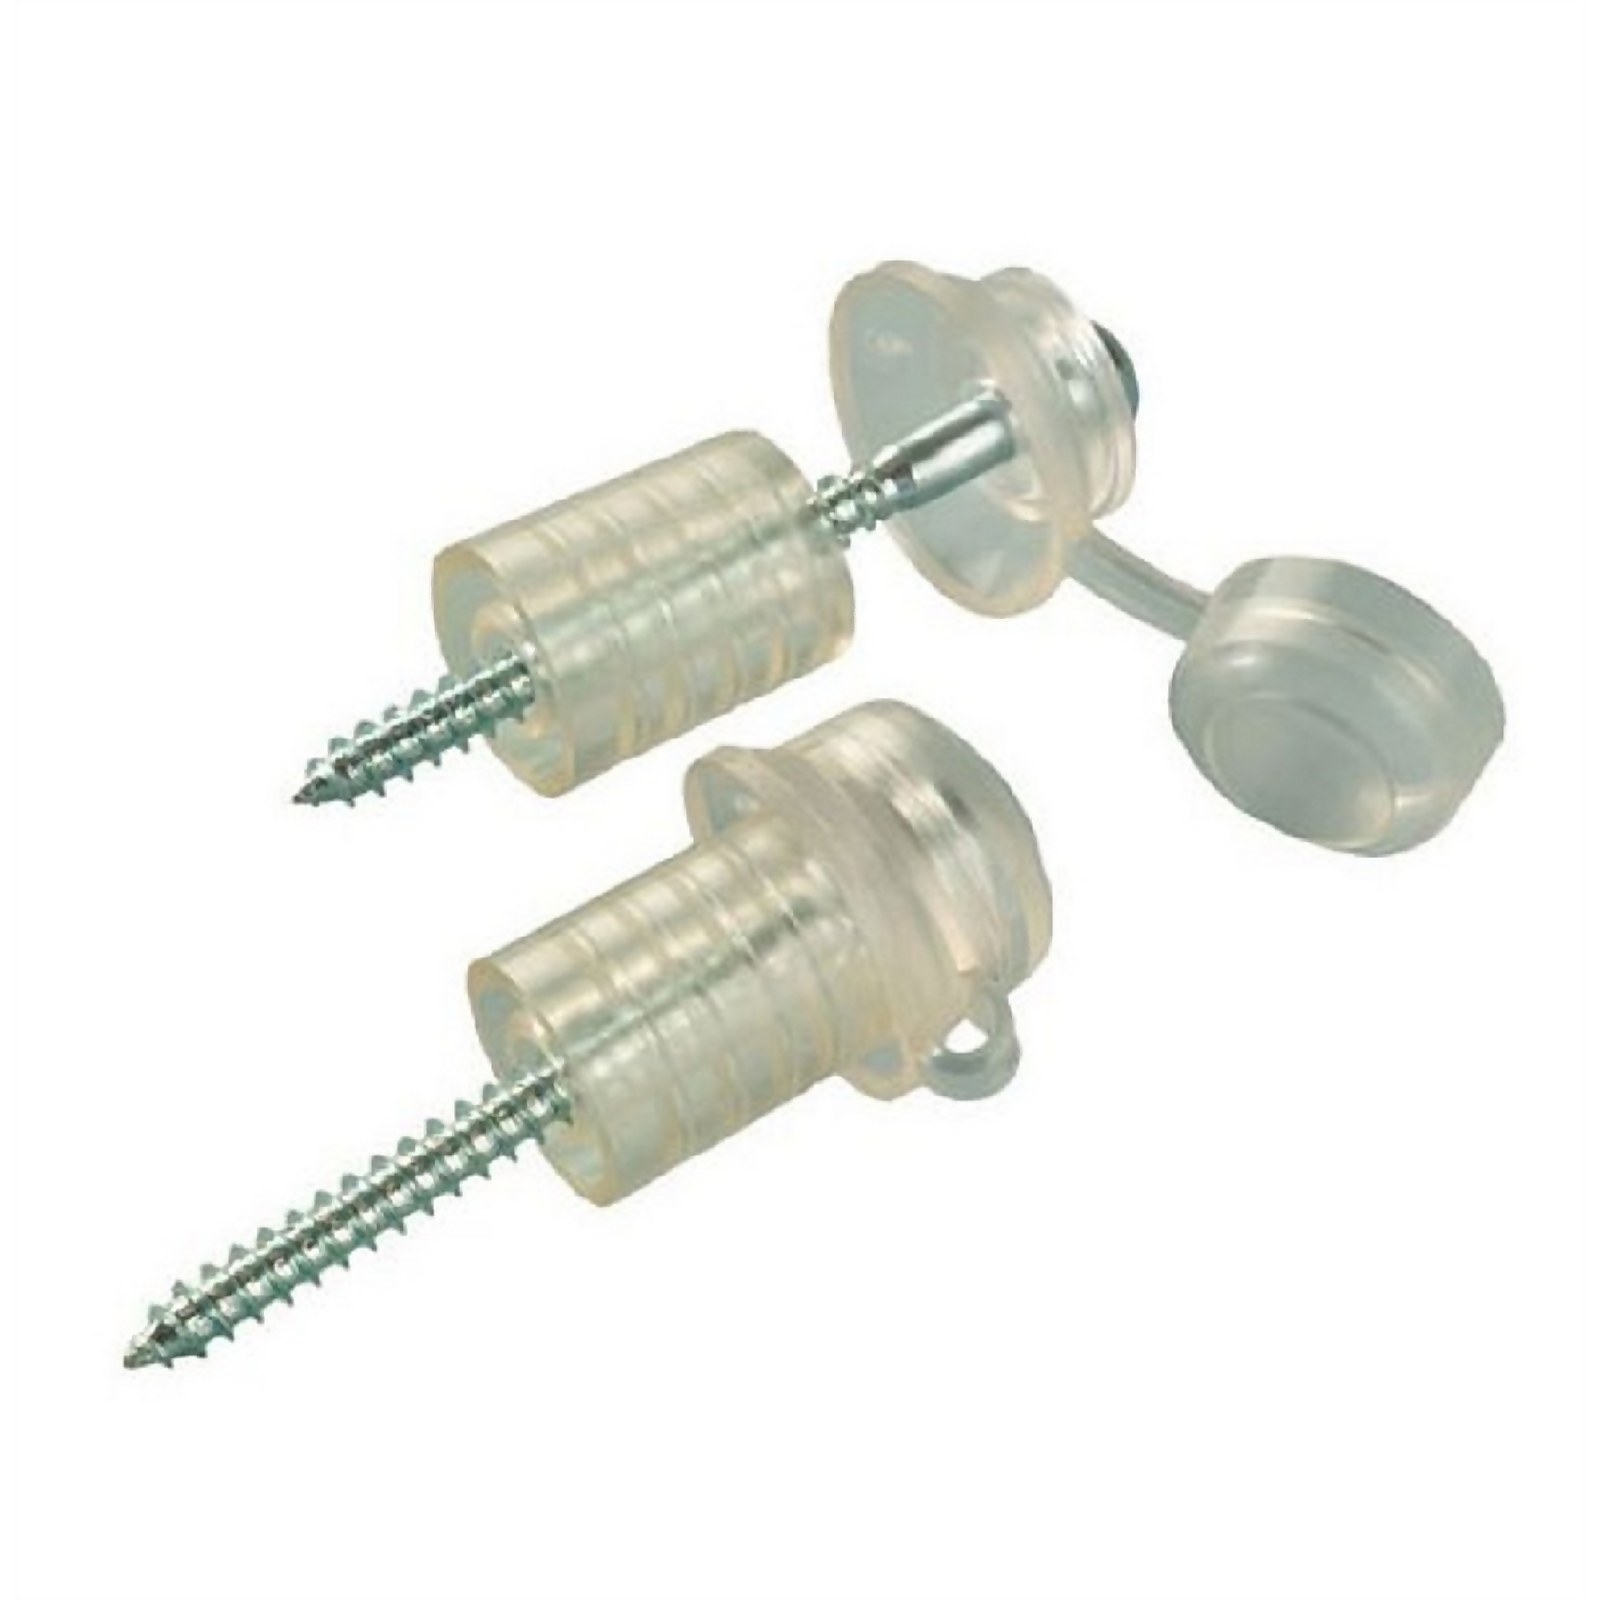 Photo of Super Fixings - 3in - 10 Pack